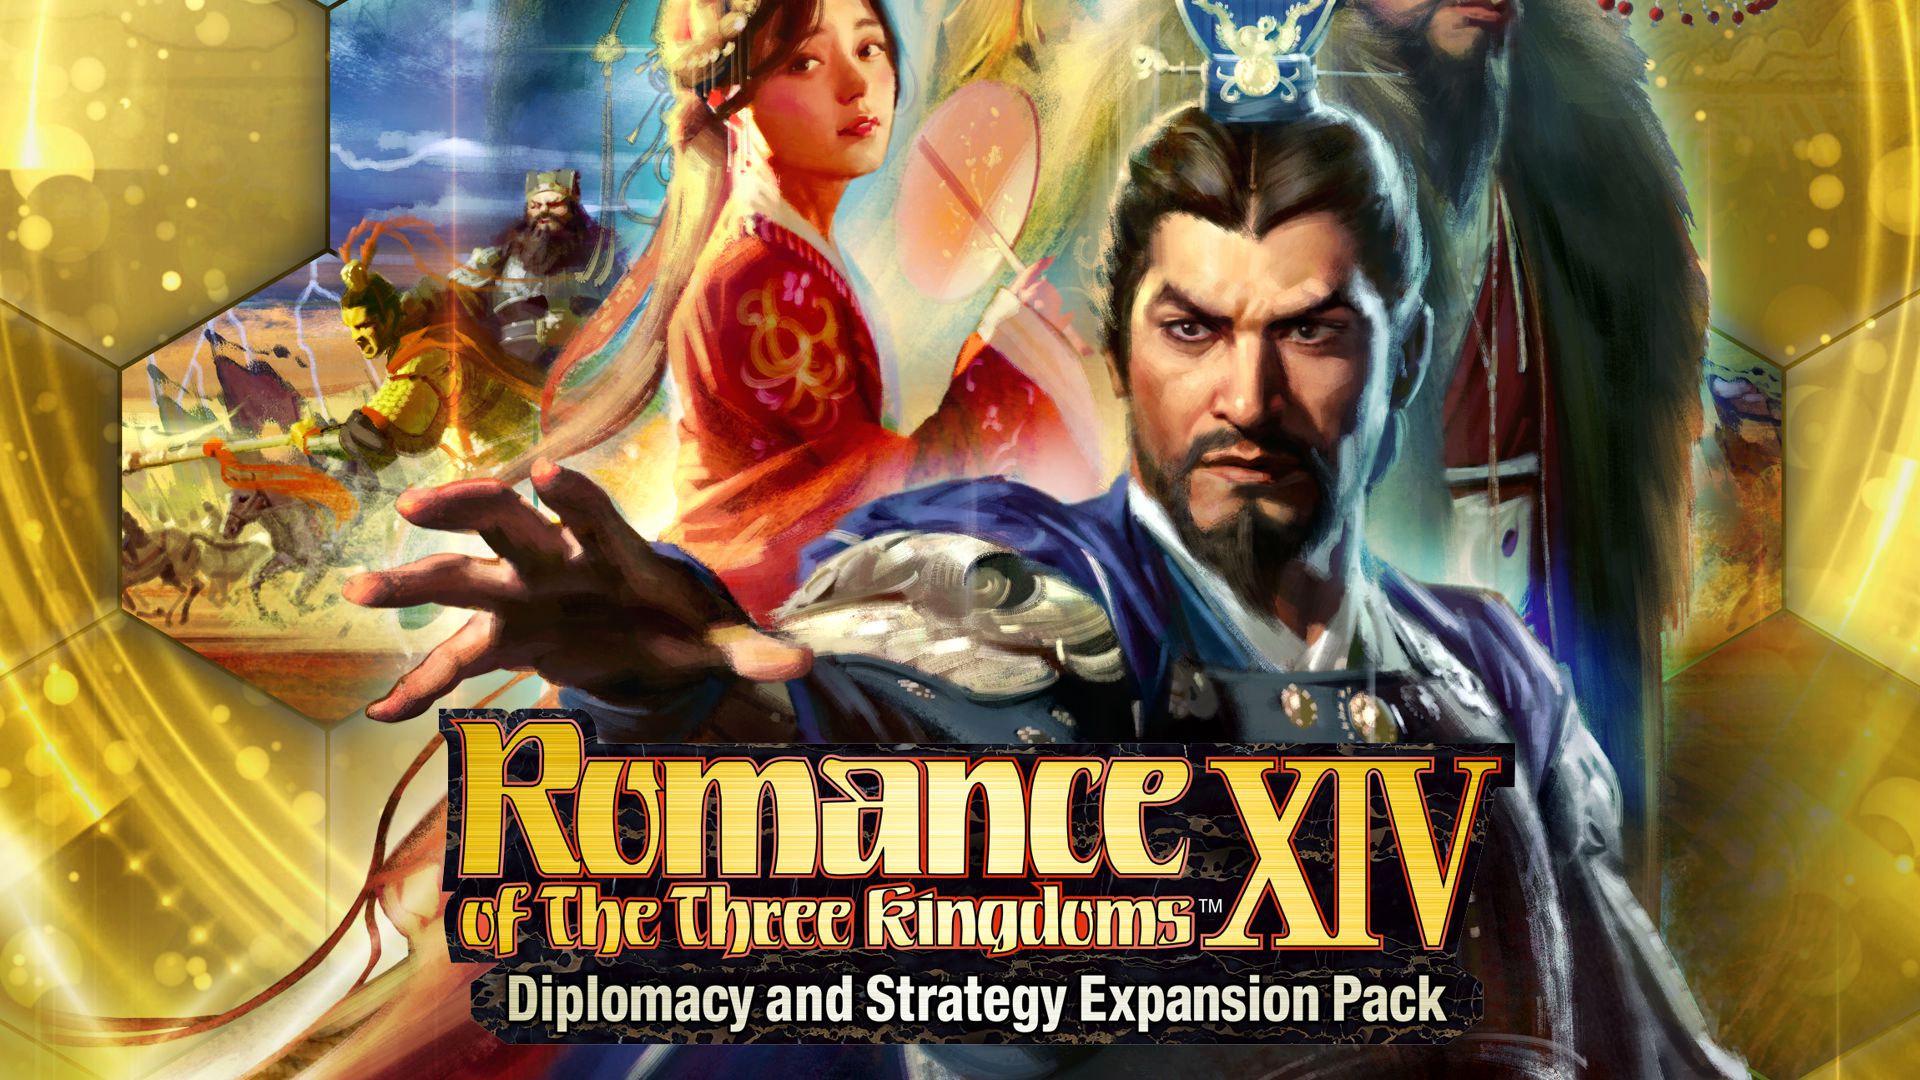 Romance of The Three Kingdoms XIV - Diplomacy and Strategy Expansion Pack